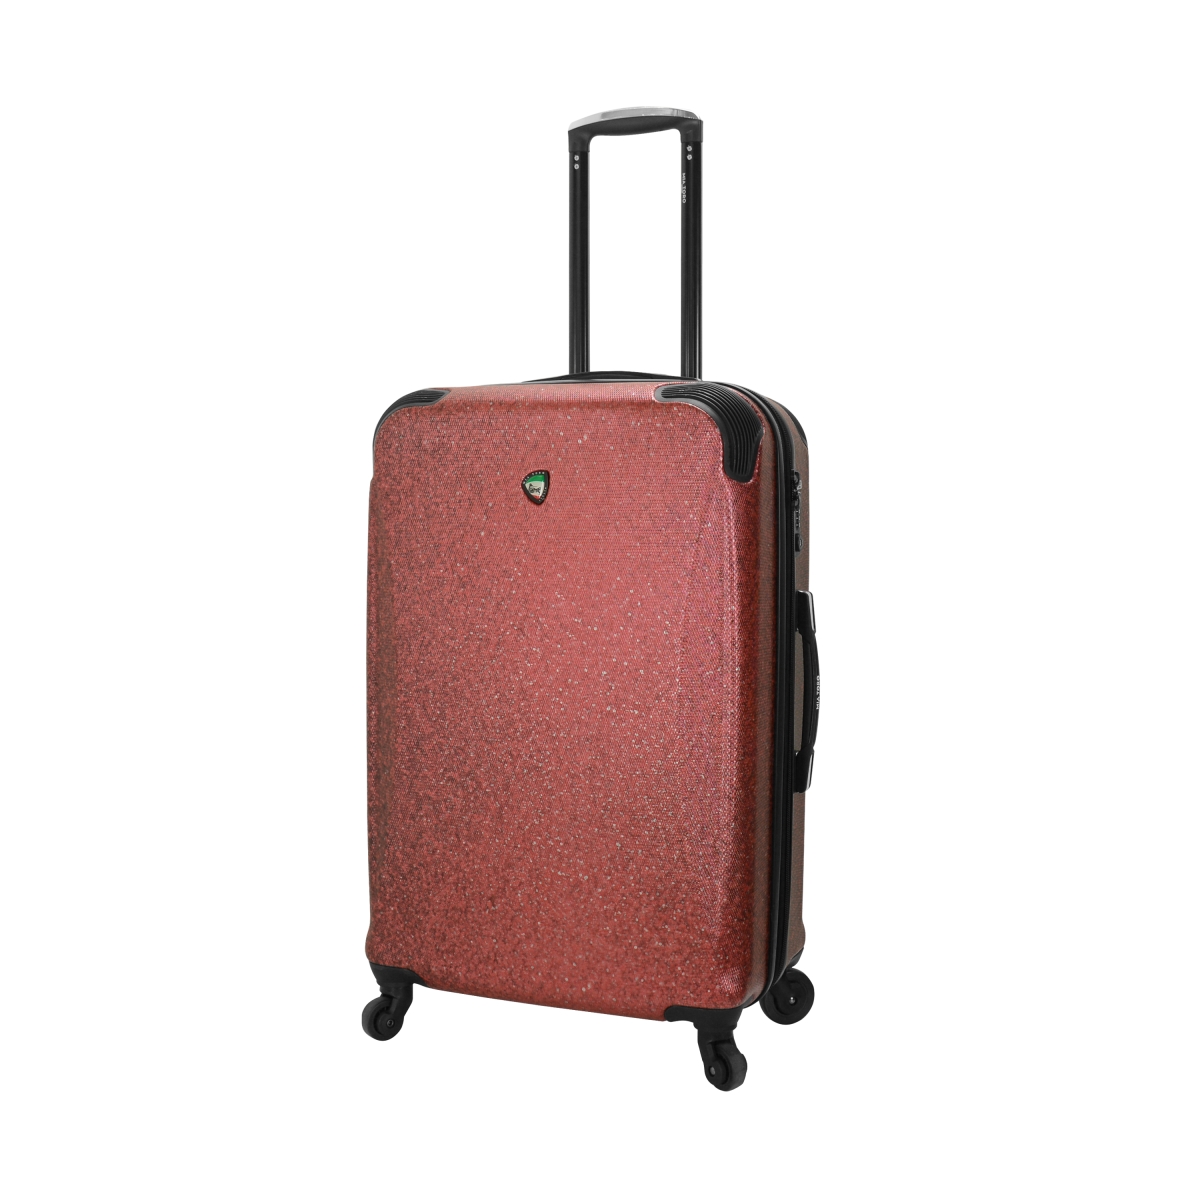 Italy M1537-26in-red 26 In. Ofena Hardside Spinner Luggage, Red